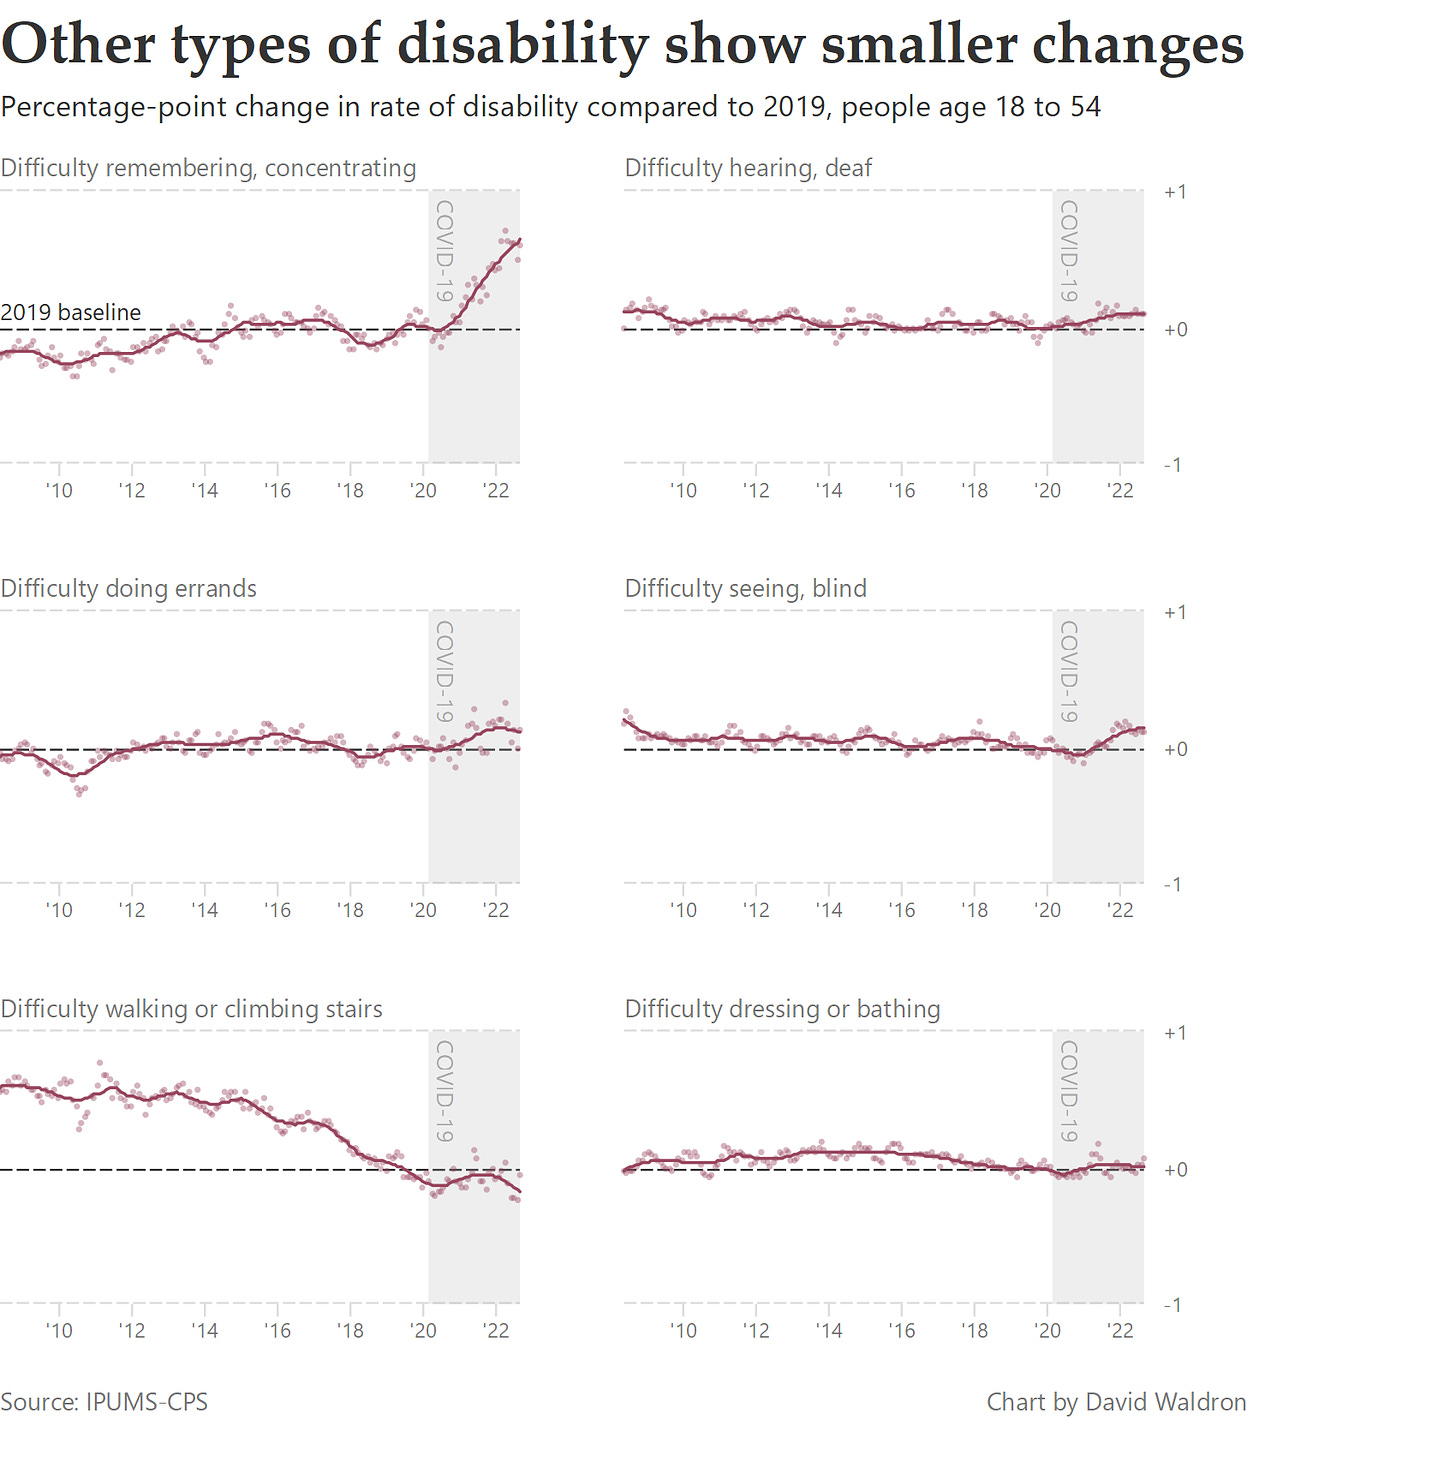 Six line charts show how the prevalence of various types of disability changes during the COVID-19 pandemic. Difficulty remembering and concentrating shows the highest increase, while other types of disability, hearing, seeing, mobility, self-care, show little change.